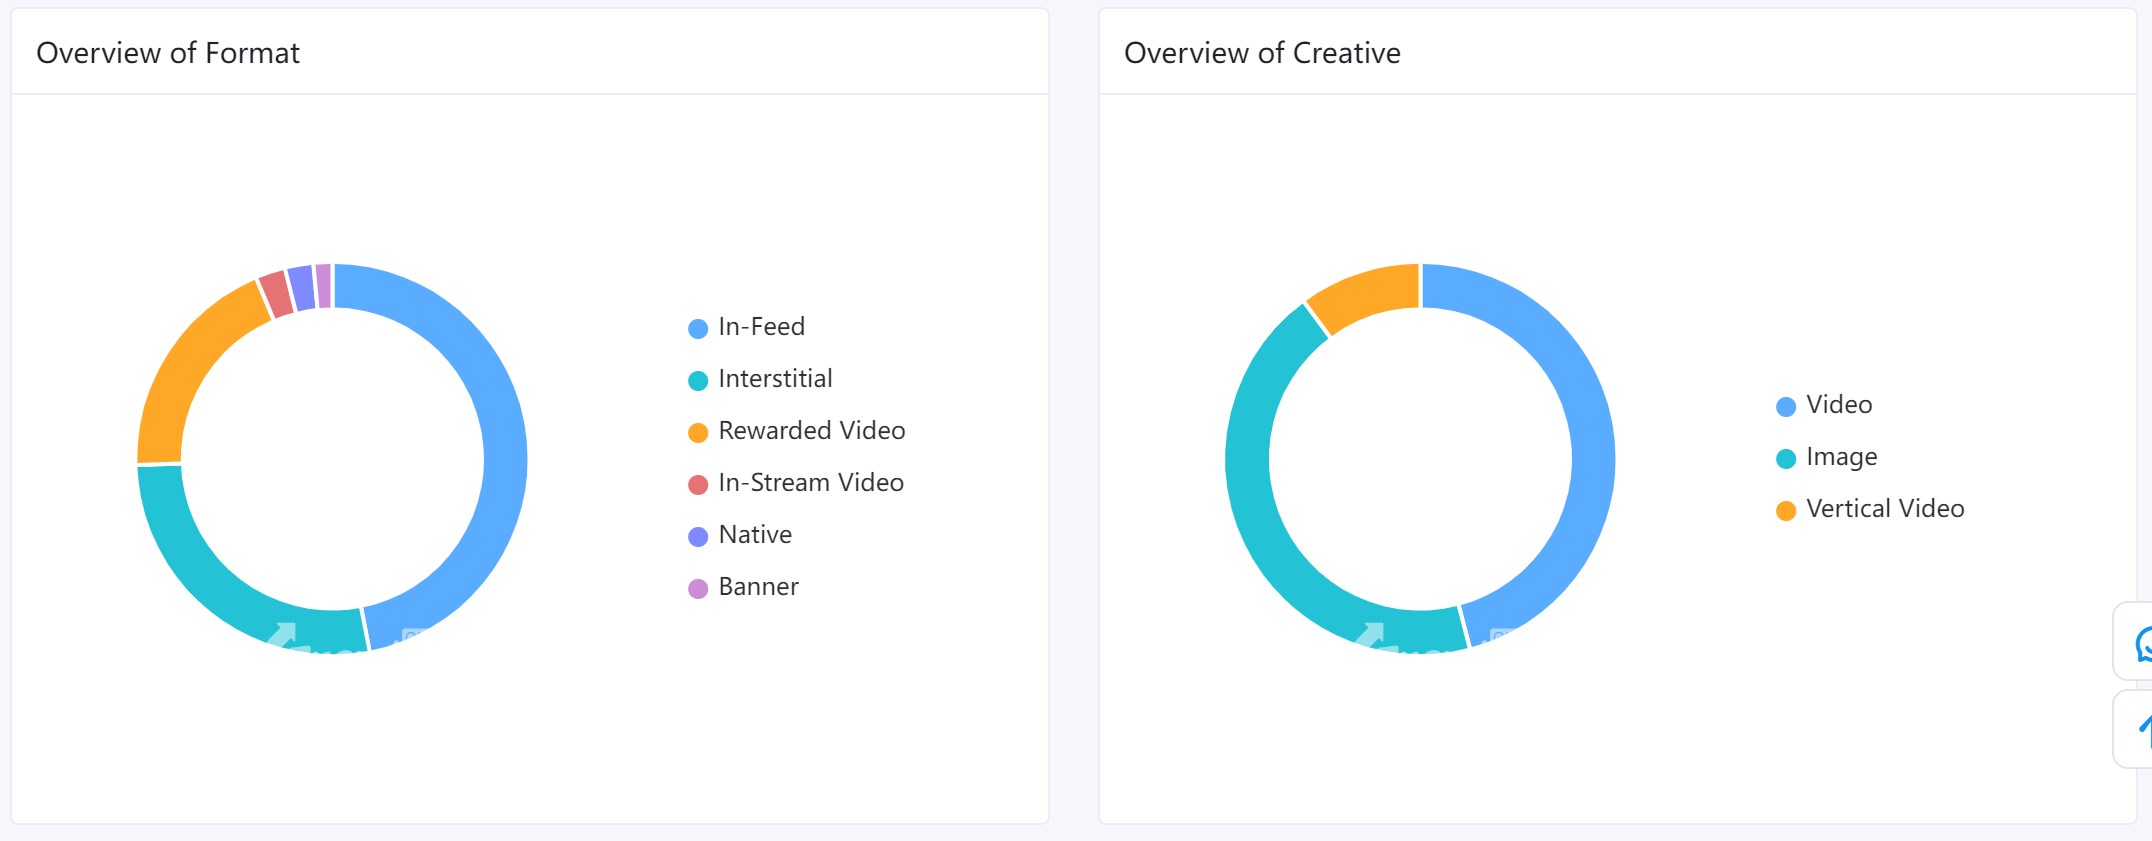 Undawn created 707 ads in total, around 49.79% of which are in the form of in-feed. Ad creatives are mainly image and horizontal video. Their proportion is around 46.39% and 43.71% respectively.